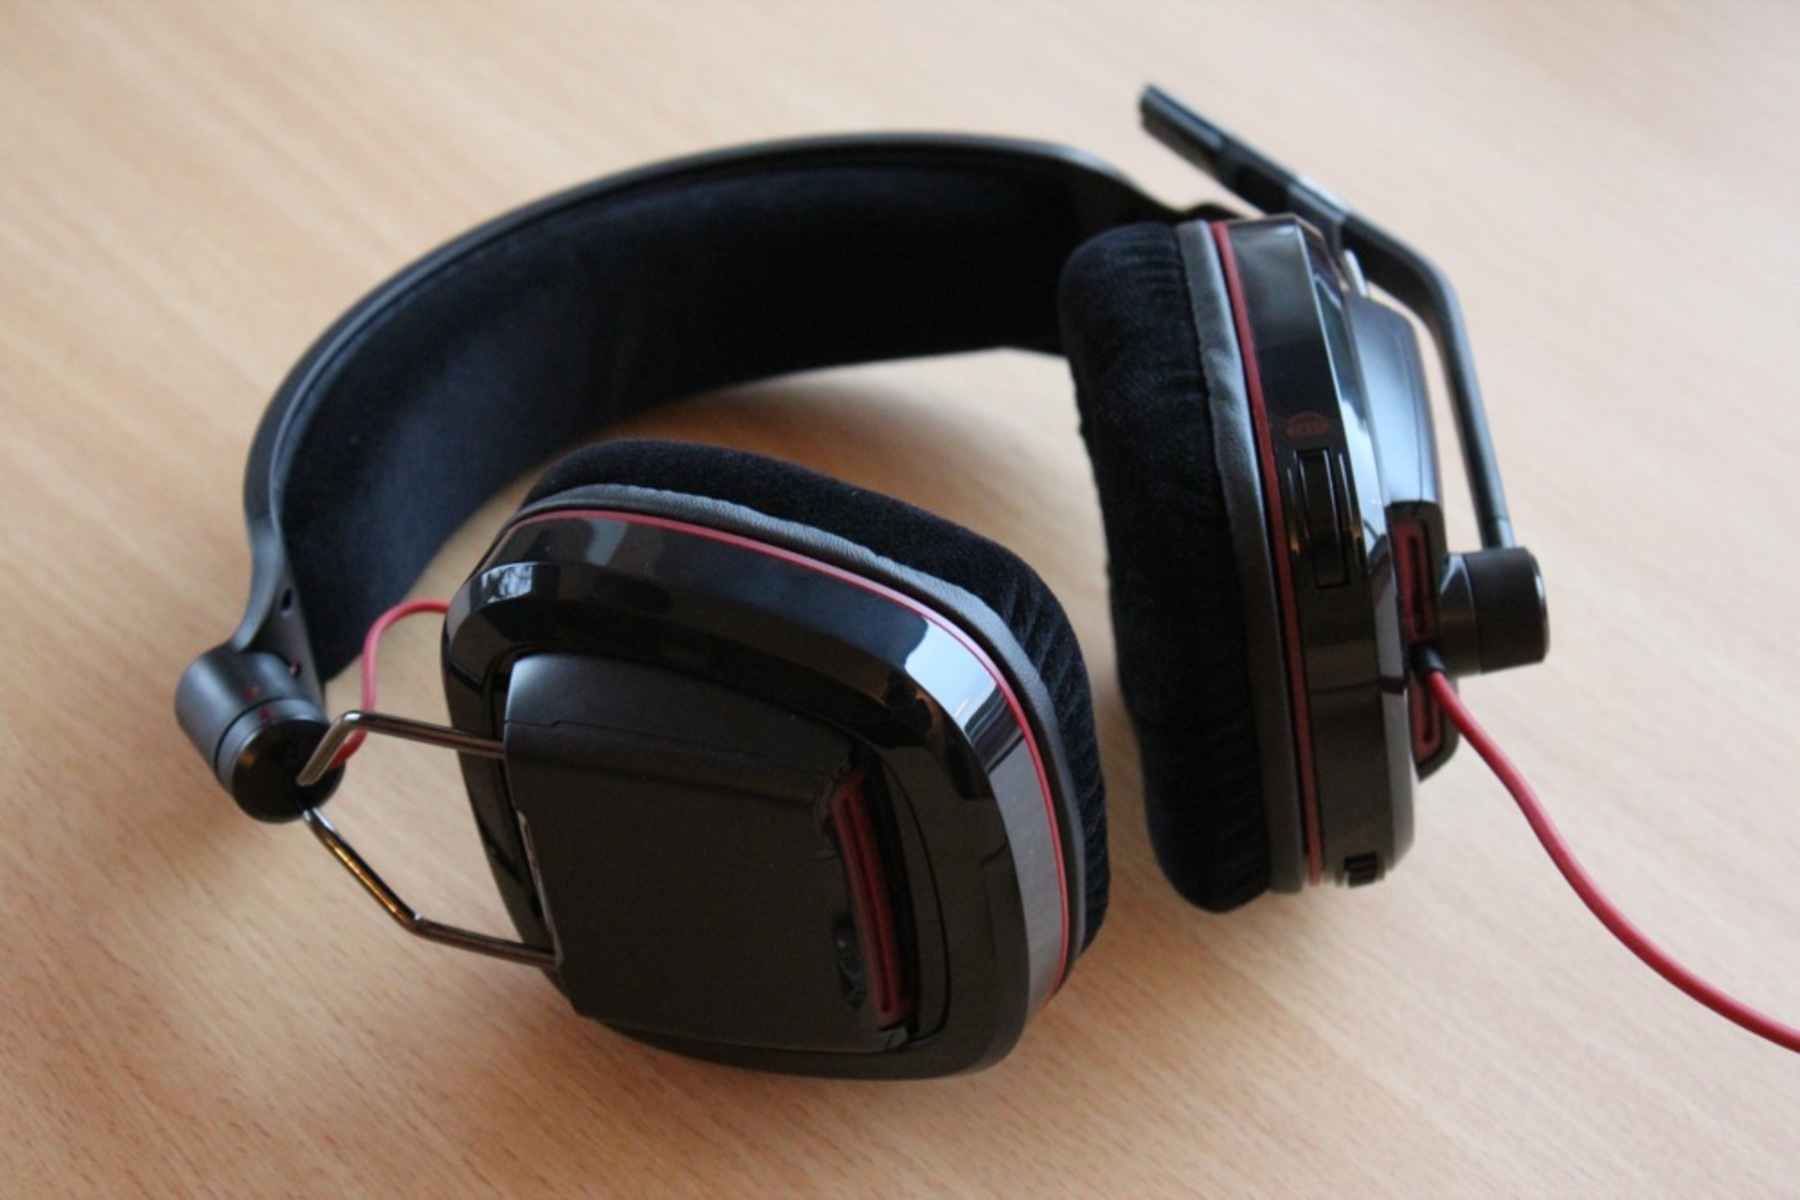 How To Restuff Ear Cushions on PC 310 Gaming Headset